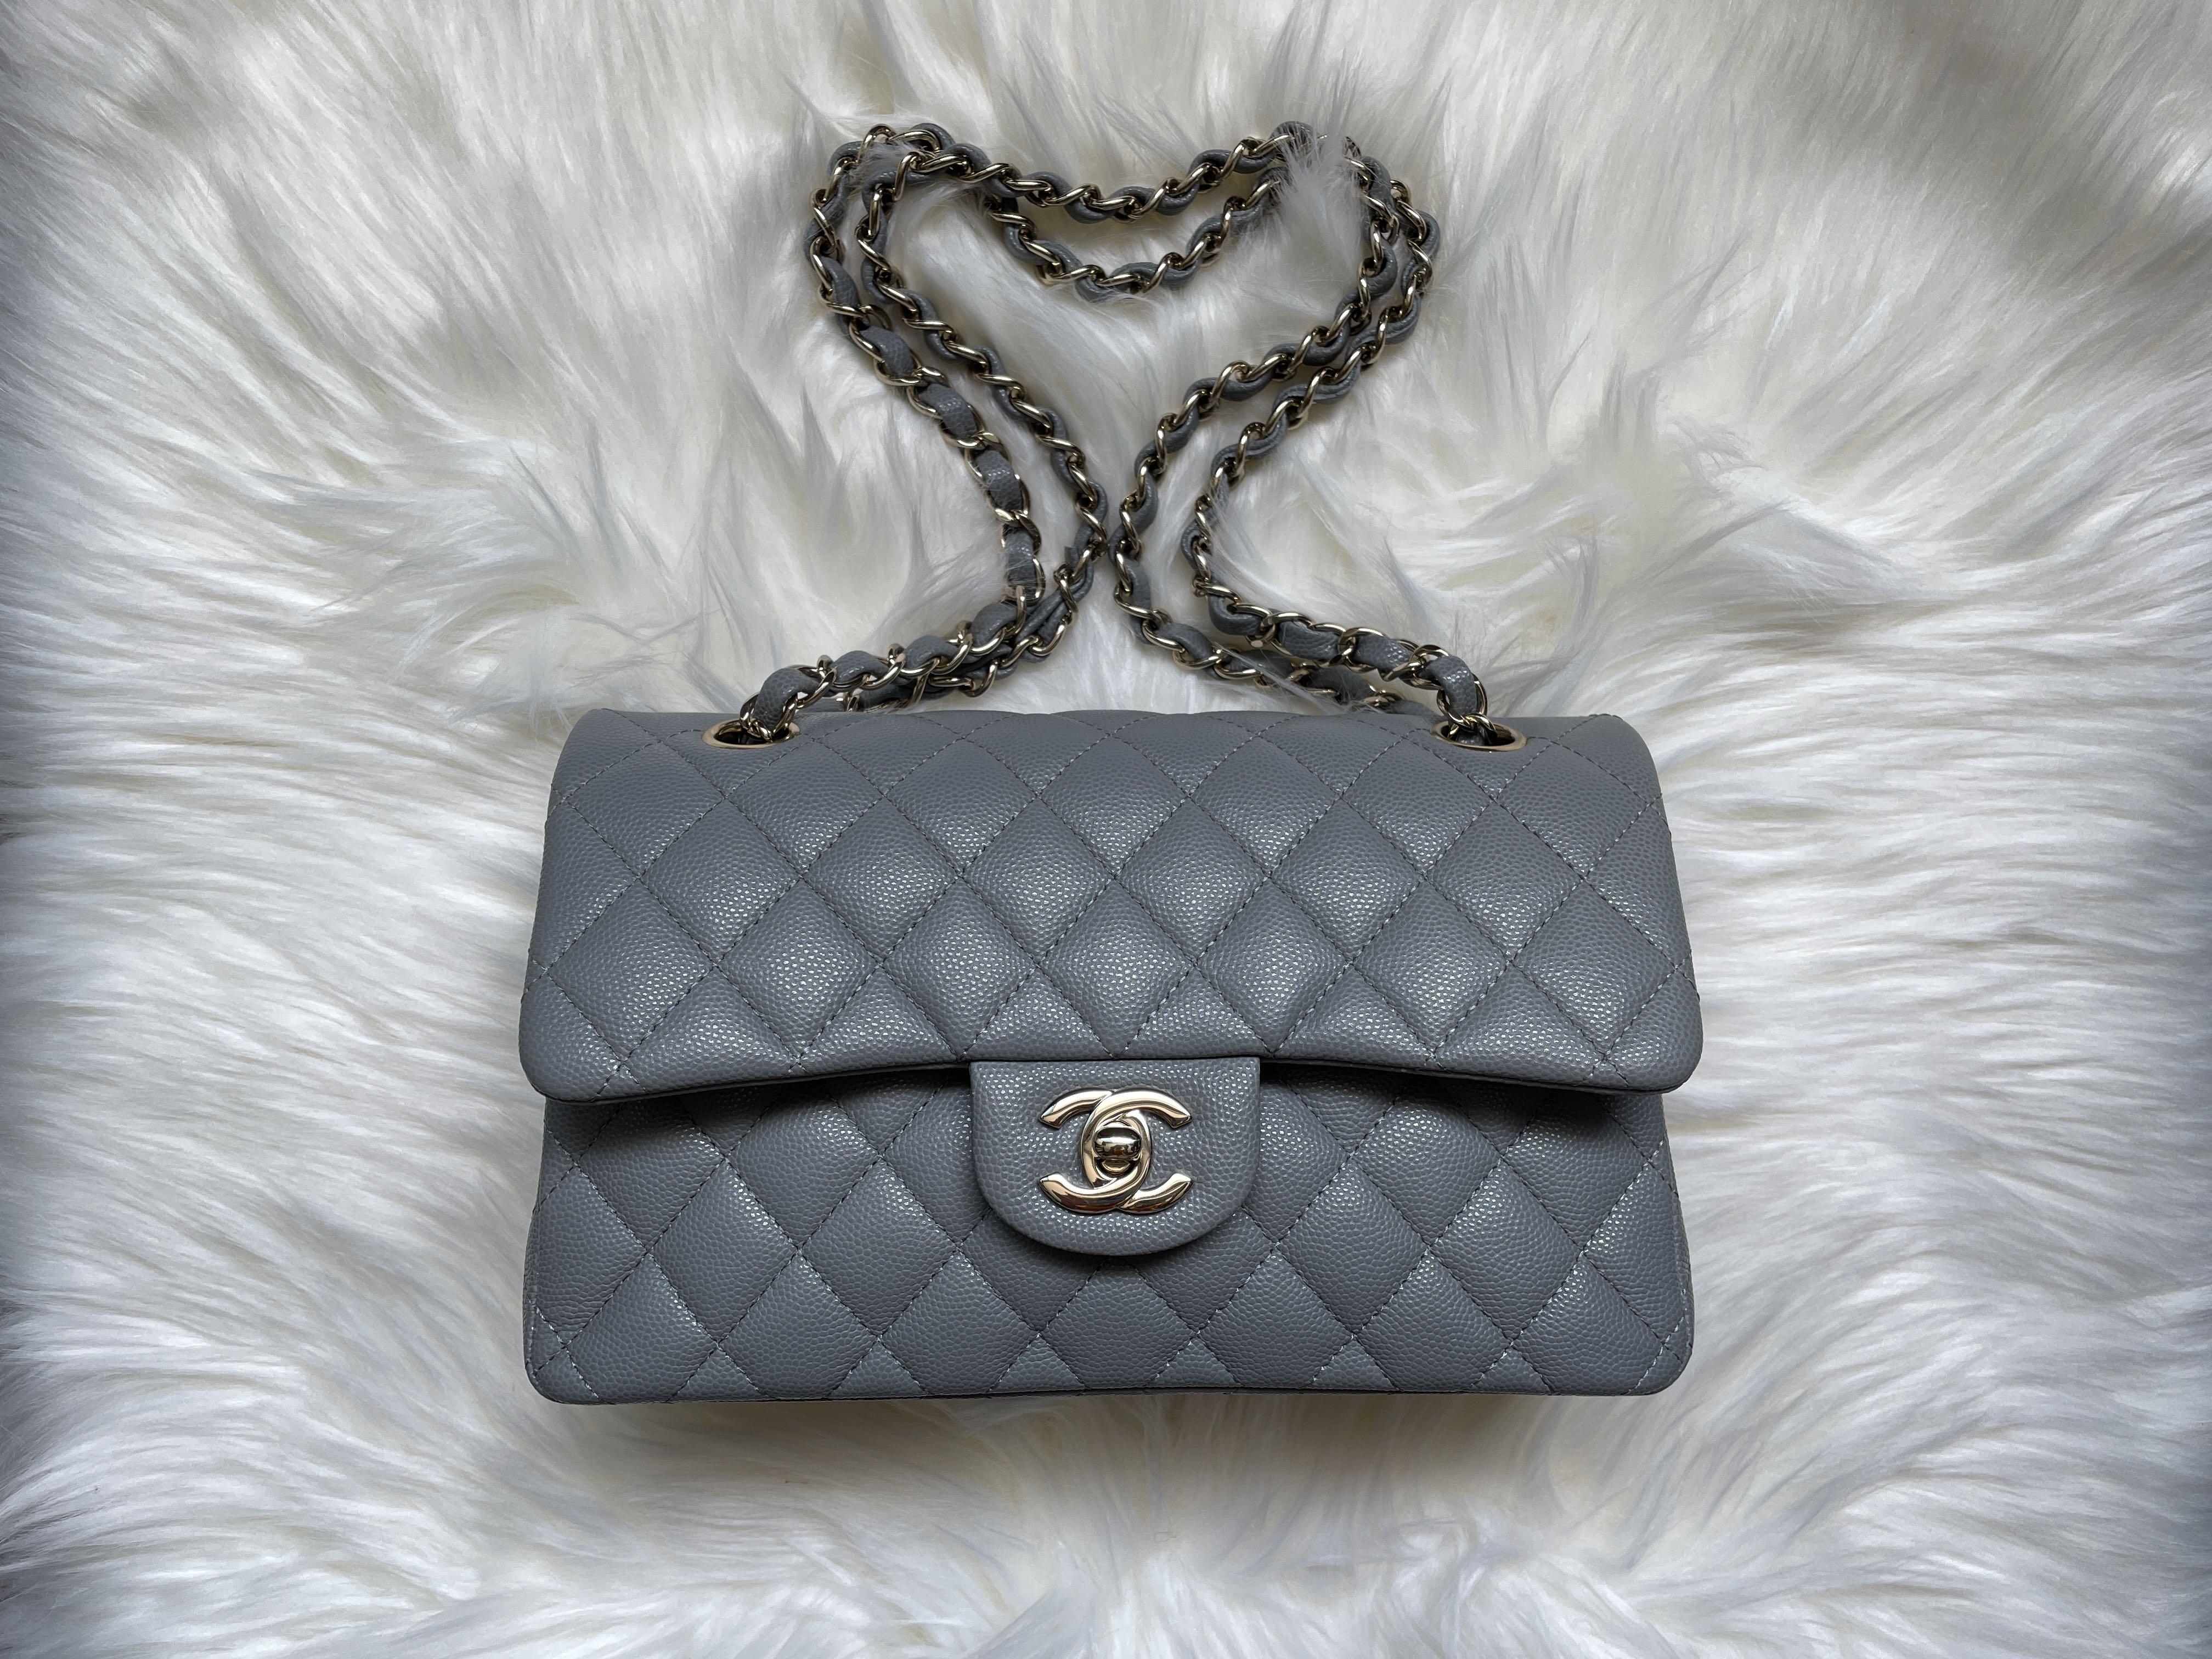 CHANEL MEDIUM CLASSIC FLAP GREY 22B - UNBOXING AND FIRST THOUGHTS